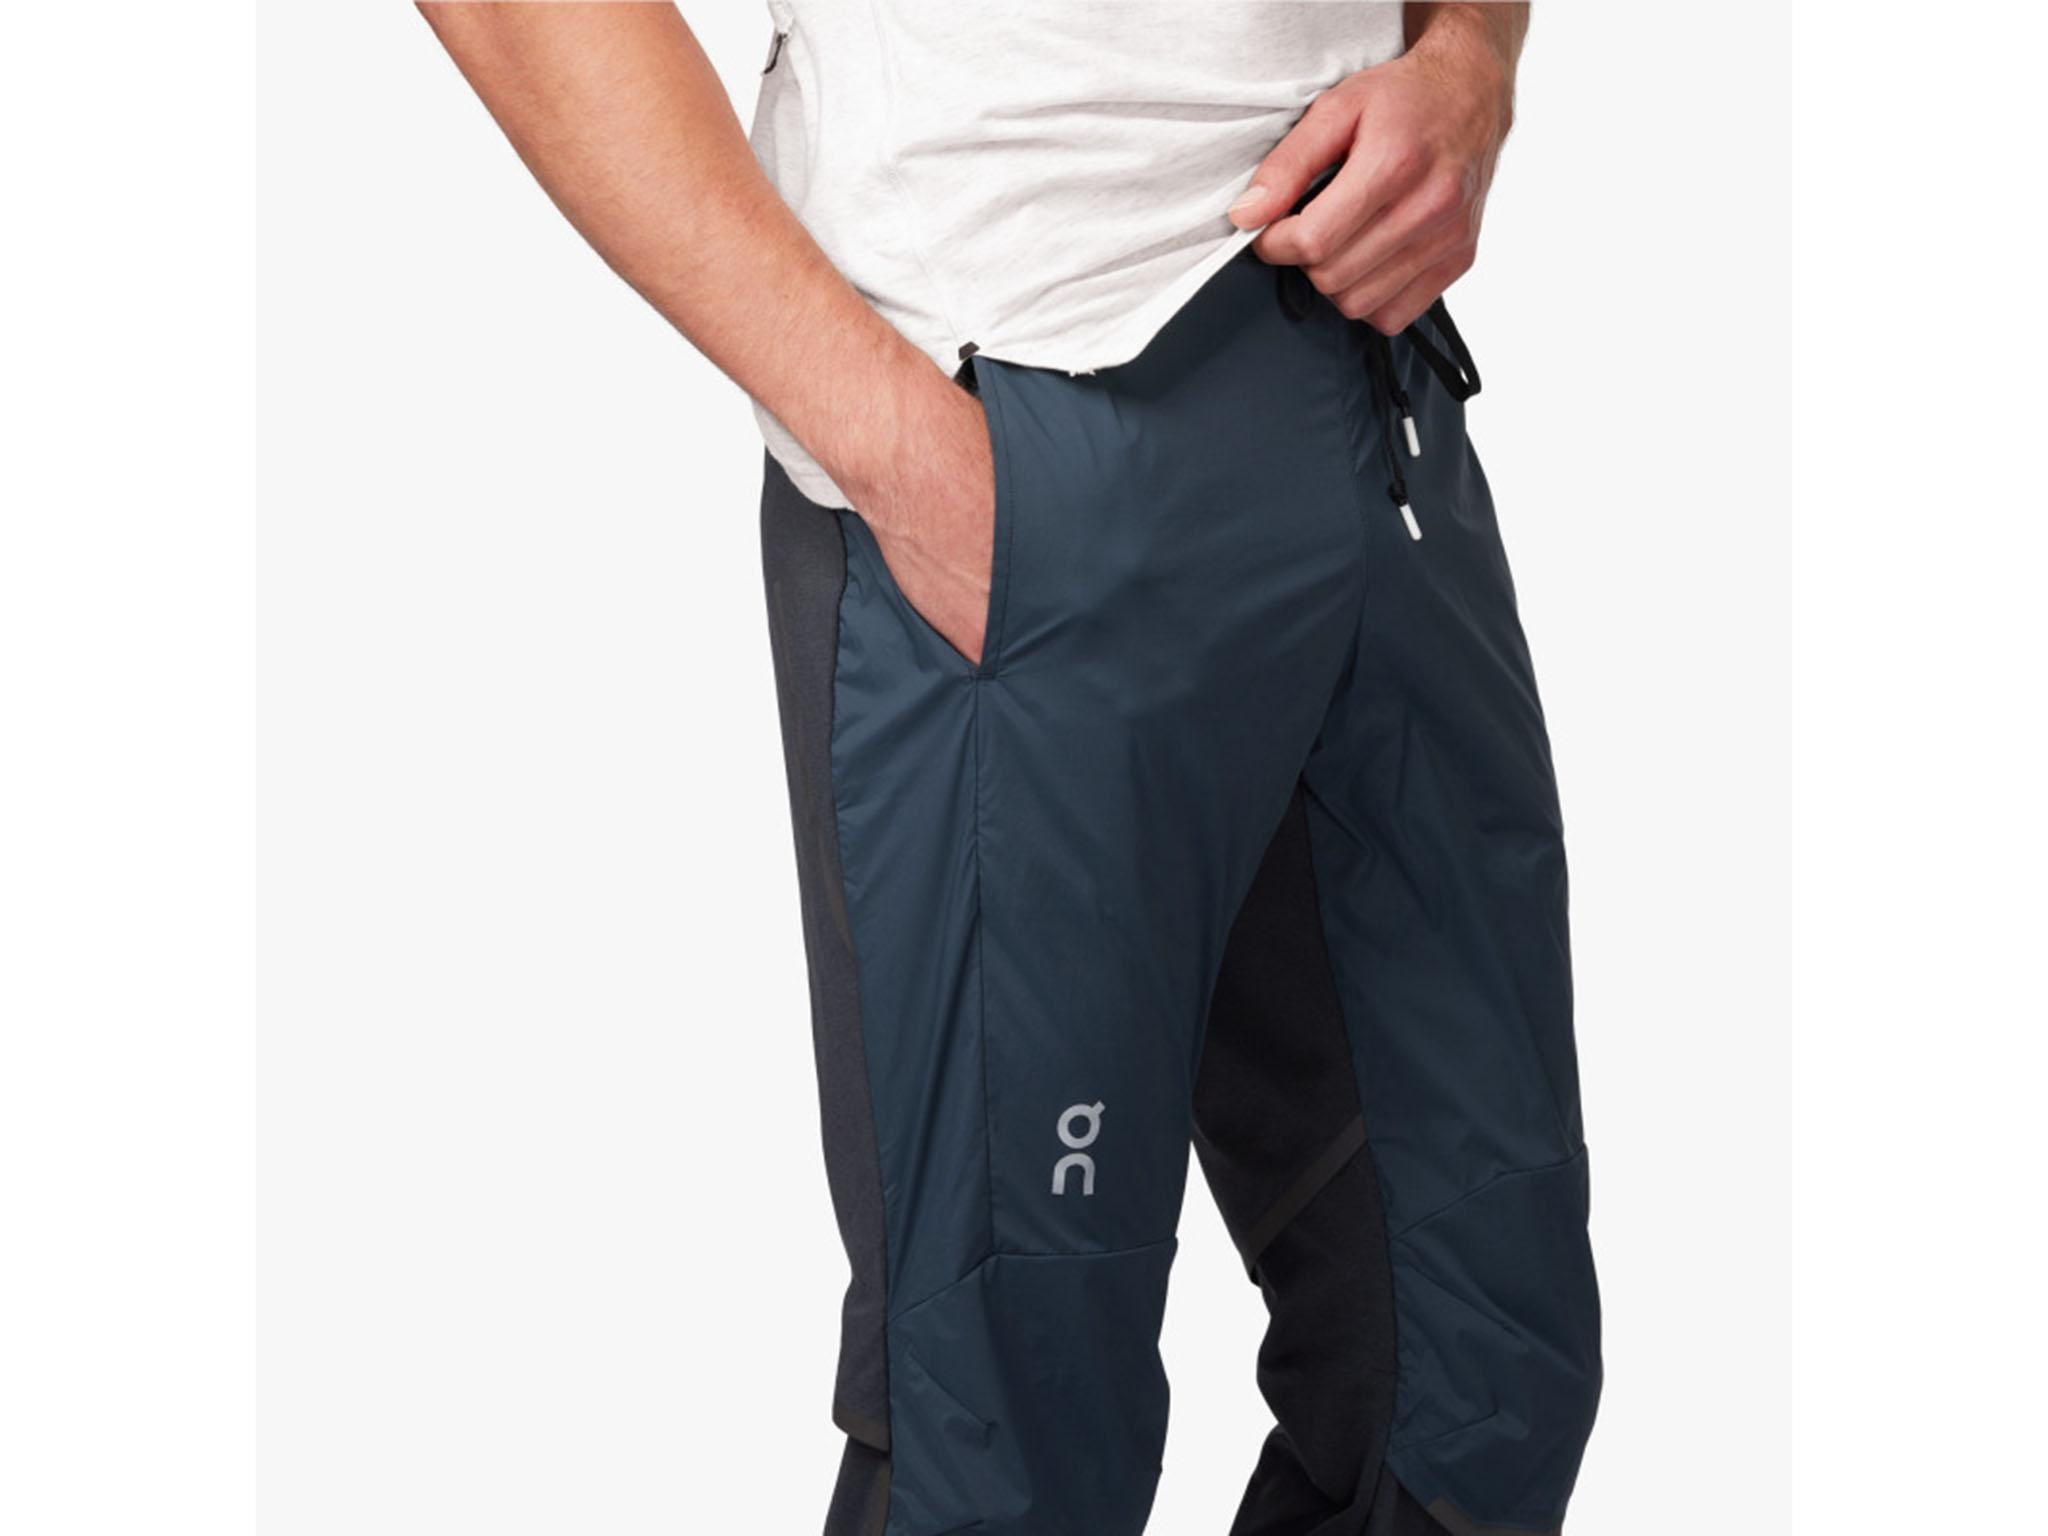 These trousers fit snugly around the ankles with an elasticated waist for maximum comfort